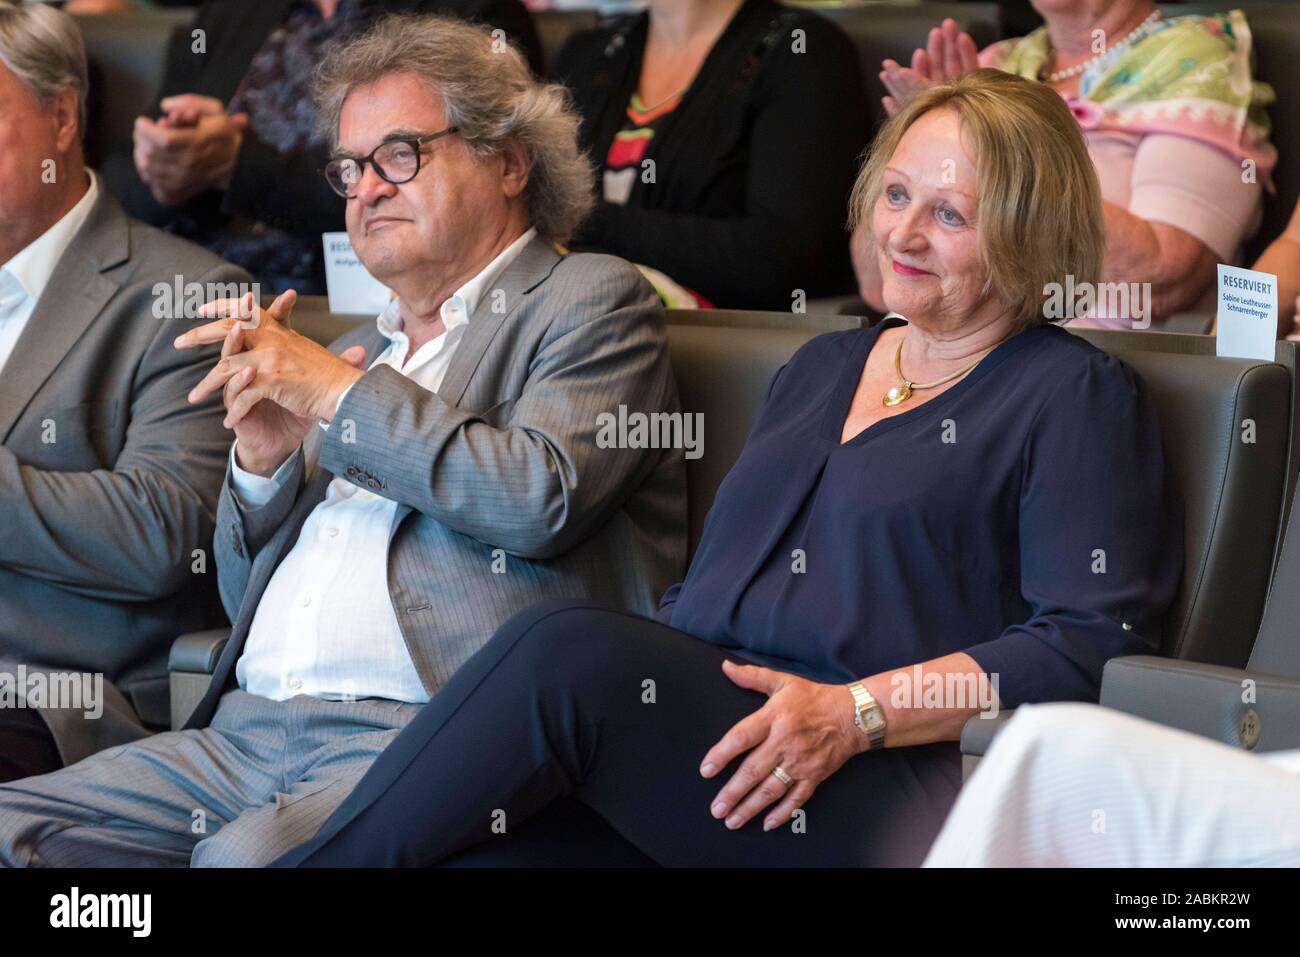 Sabine Leutheusser-Schnarrenberger, former Federal Minister of Justice, sits next to Helmut Markwort in the new Irenensaal of the publishing house Wort und Bild in Baierbrunn. [automated translation] Stock Photo